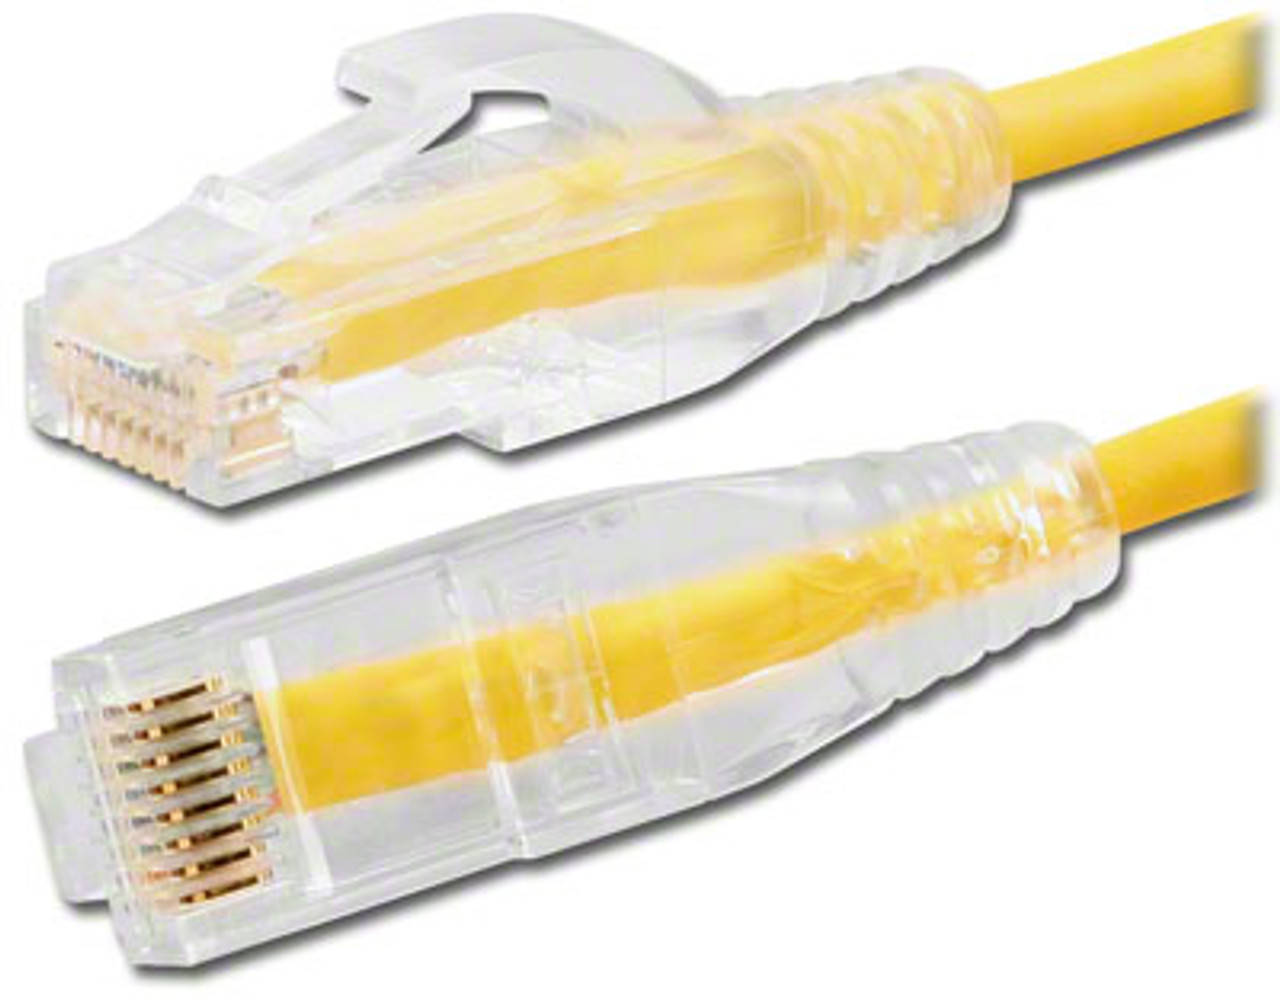 3-FT- Mini Cat 6 Thin Patch Cable - Yellow Jacket - DC-56NP-3'YWTB - TMB